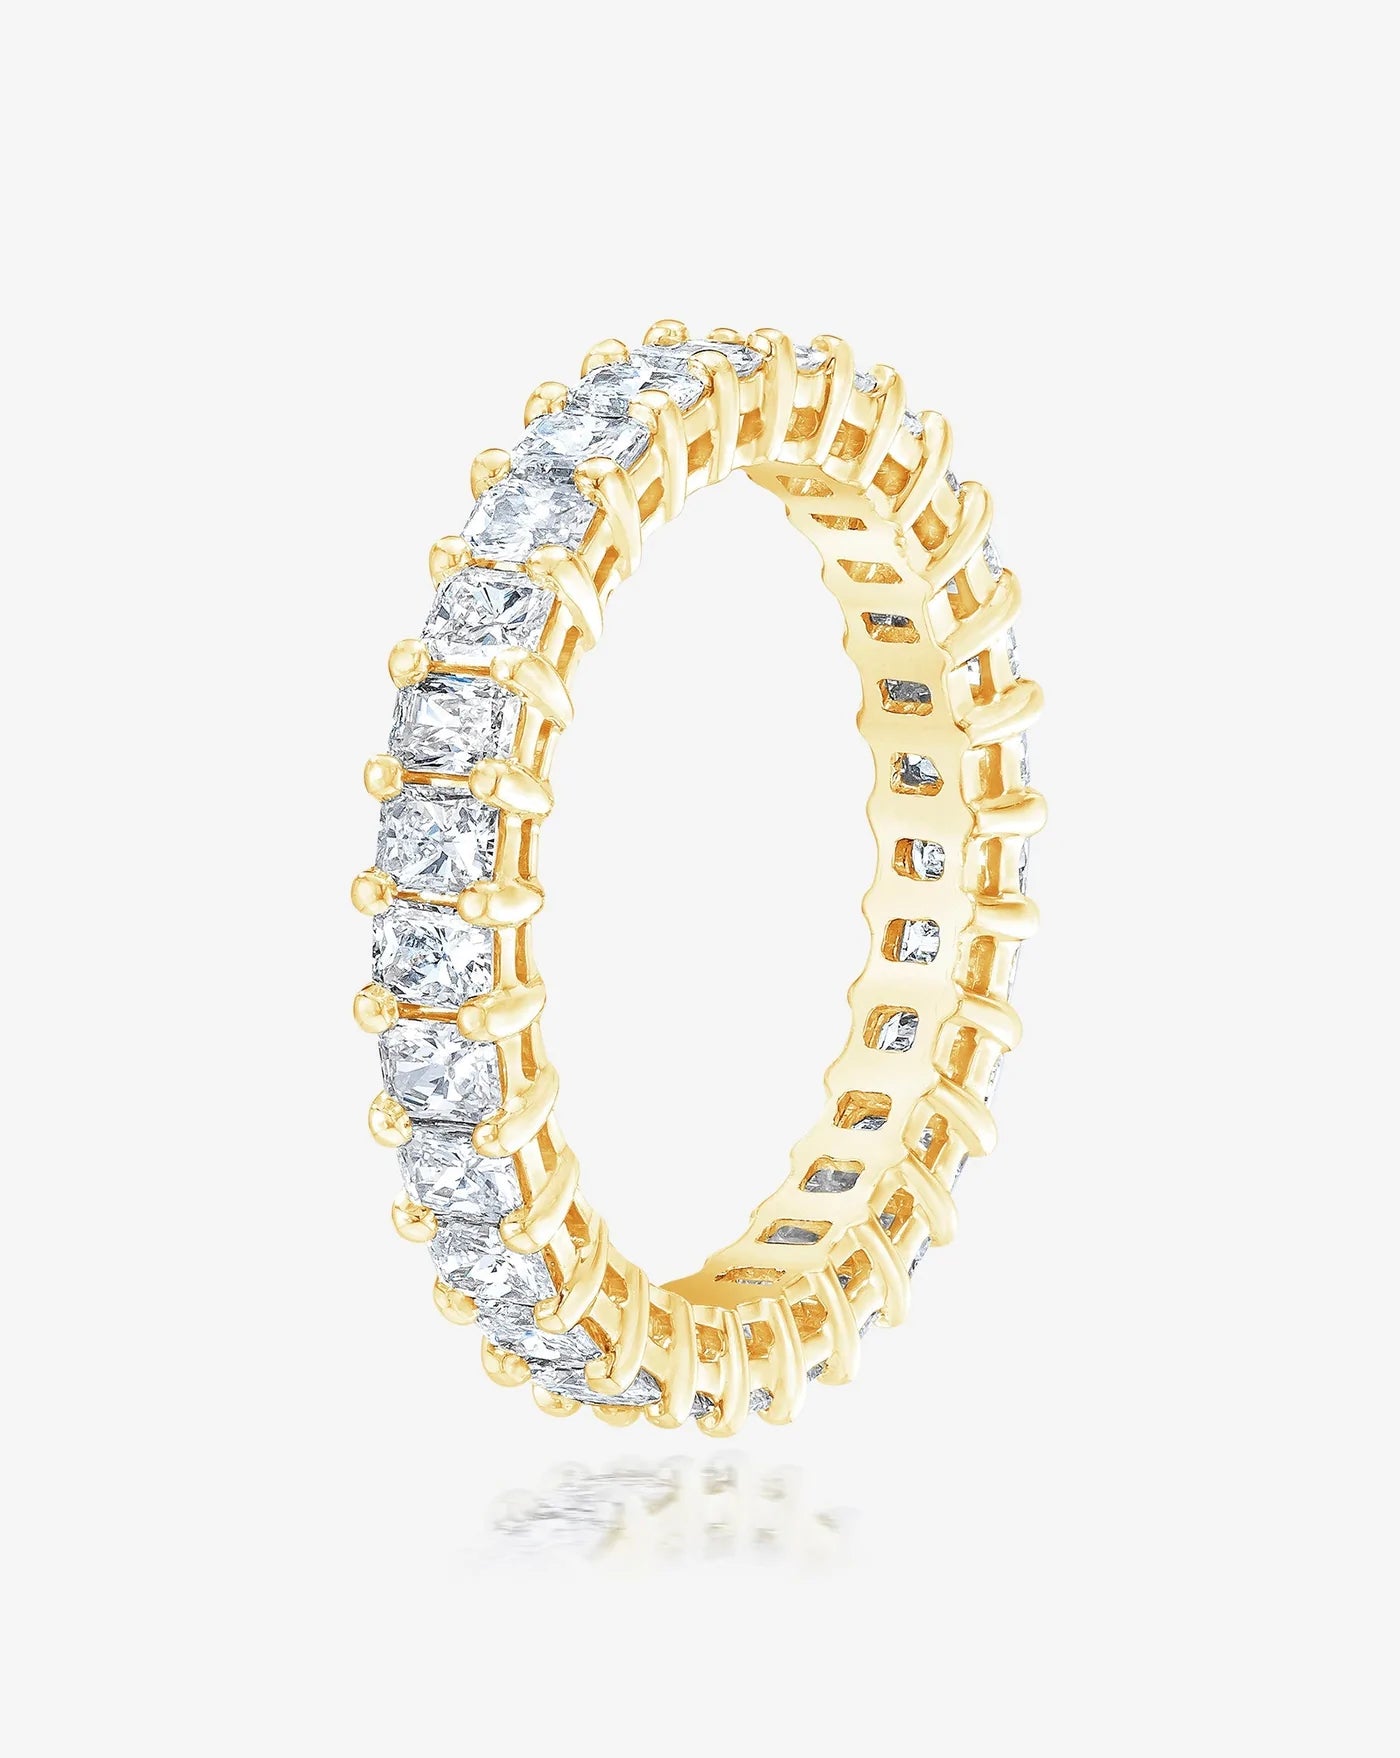 Mini Radiant Eternity Band in 14K Yellow Gold